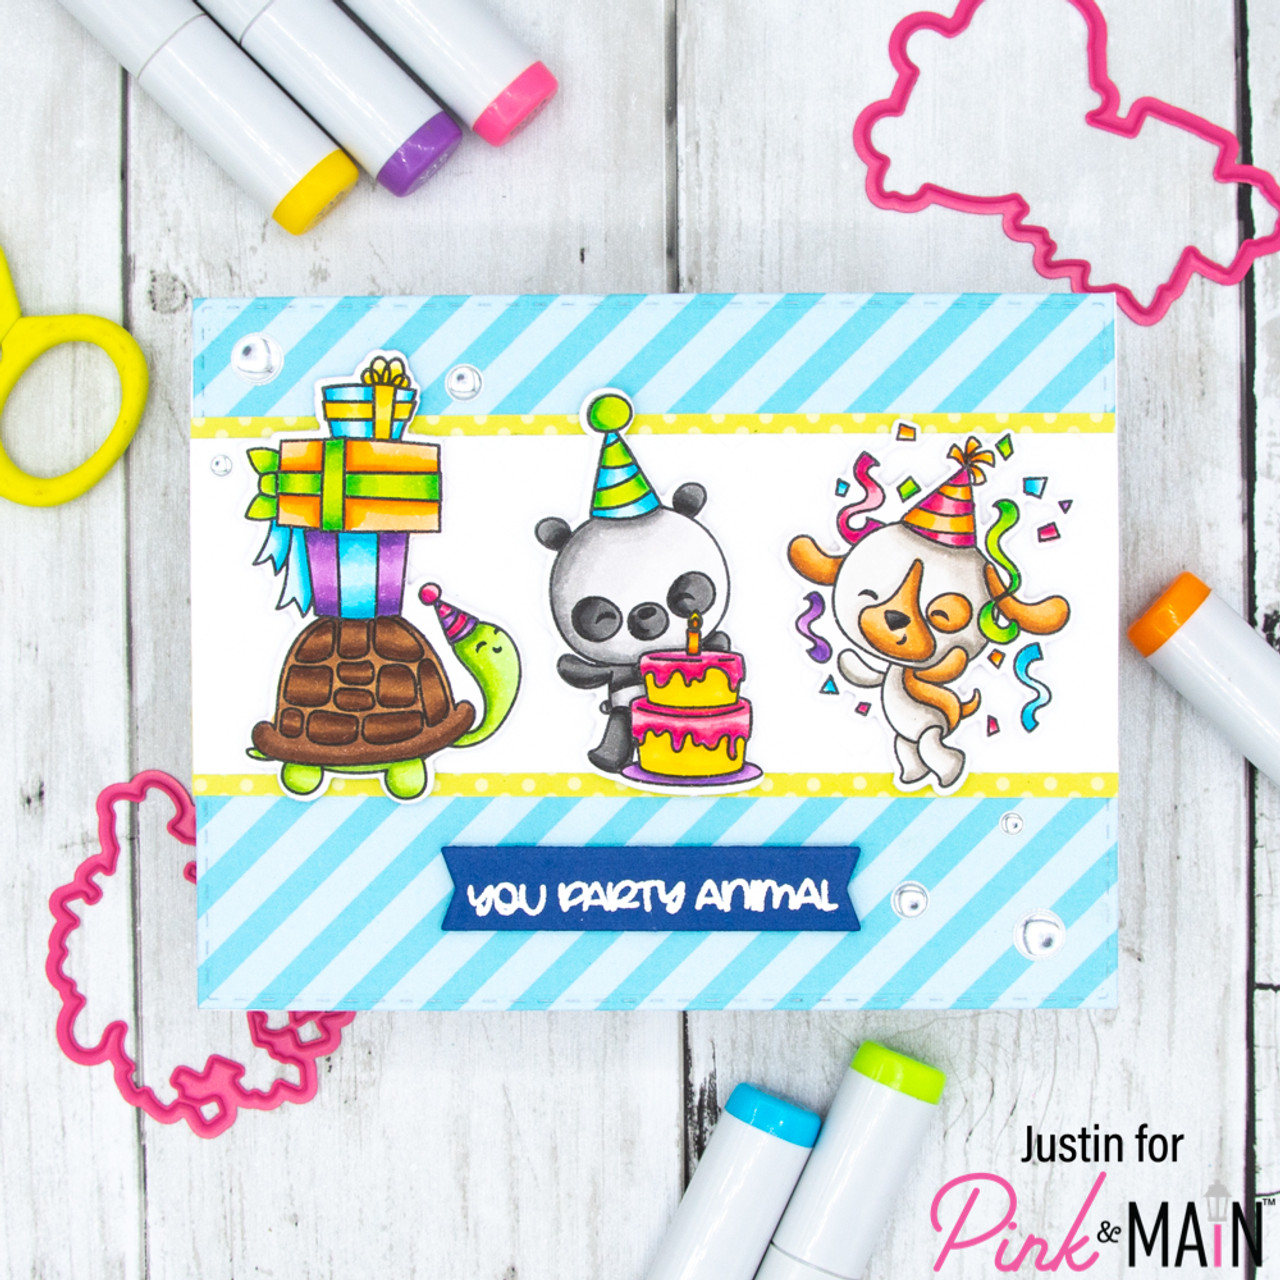 Party Animal - Pink and Main LLC